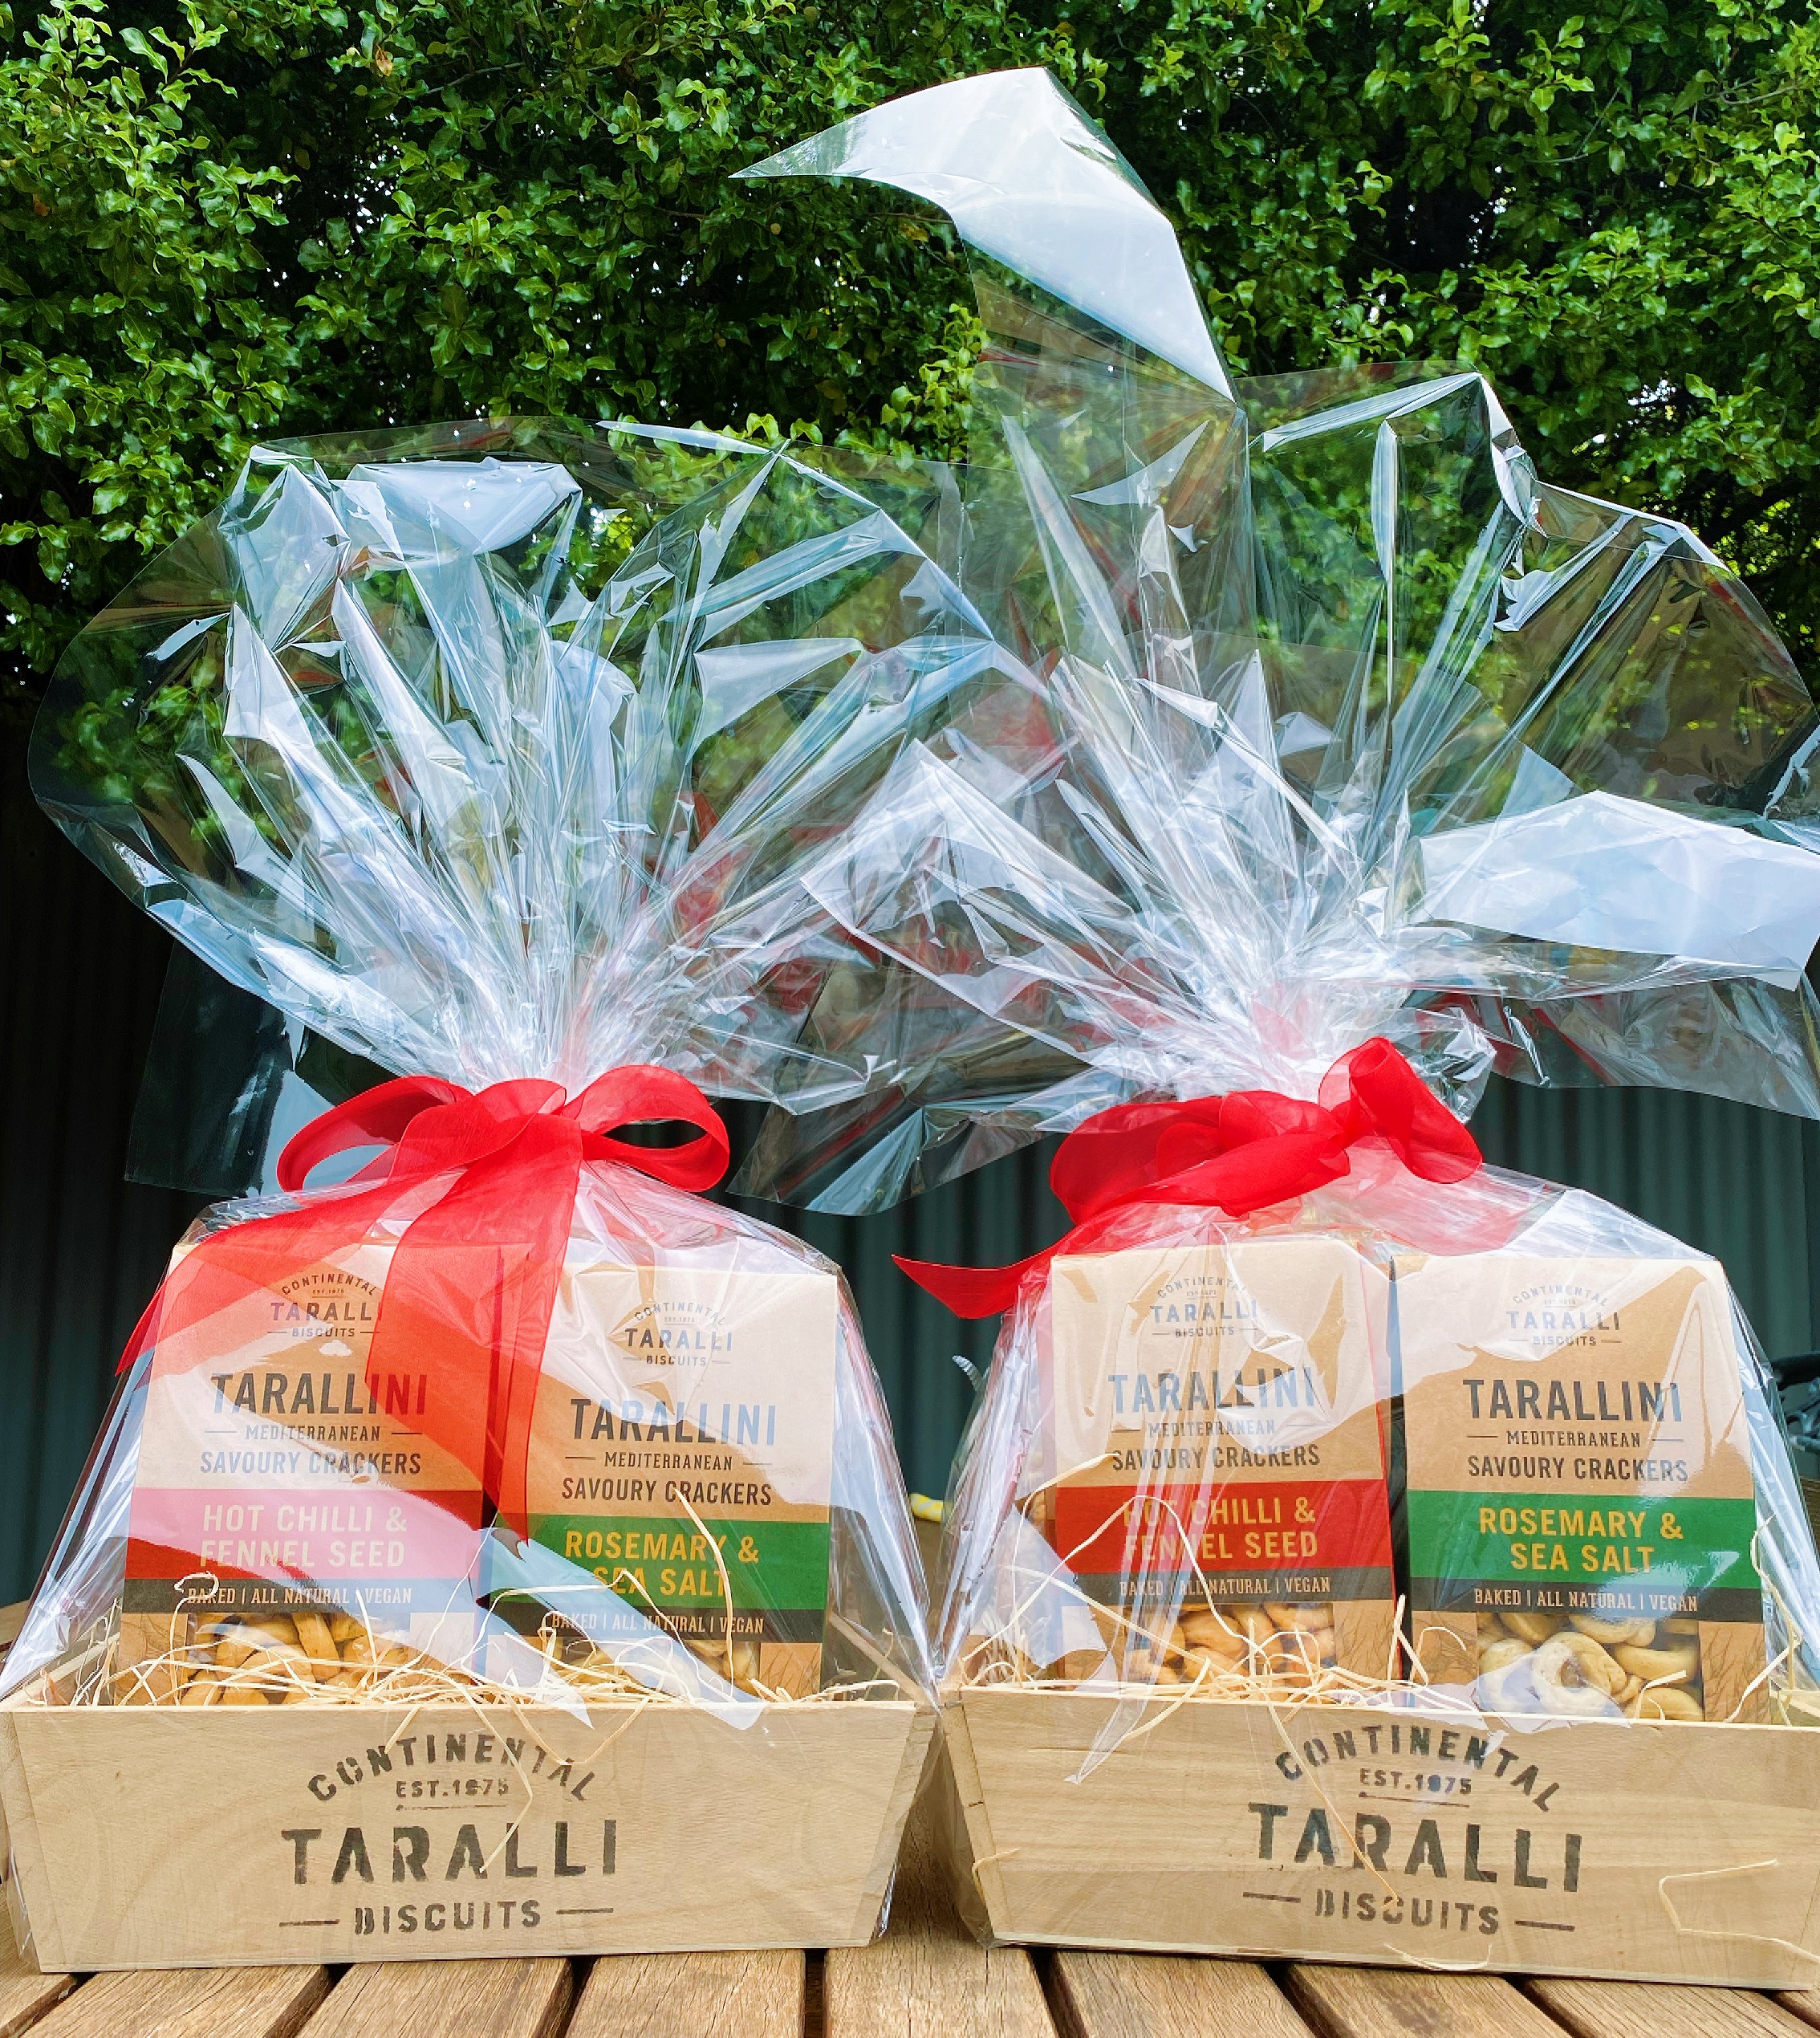 WIN two whopping Christmas hampers filled with goodies from Continental Taralli Biscuits!